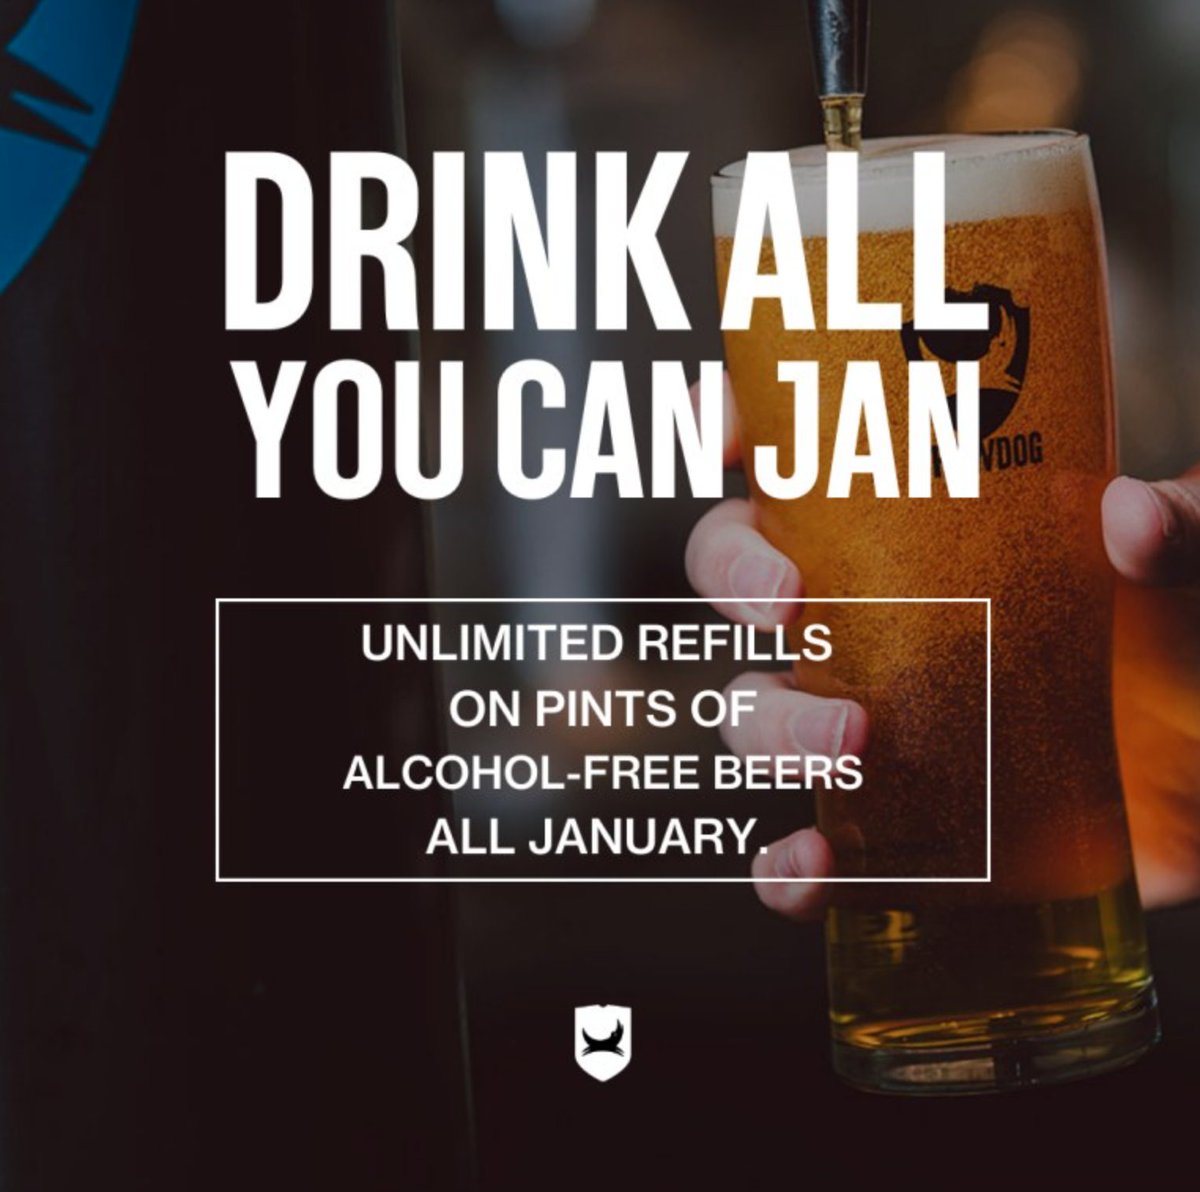 DRINK ALL YOU CAN JAN!🎉 There's just over a week left to get your fill on Unlimited AF Draft!😀 We've got Punk AF and Lost AF here at Bradford so get yourselves down here!🤩 #brewdogbradford #bradfordbar #alcoholfree #januarydeals